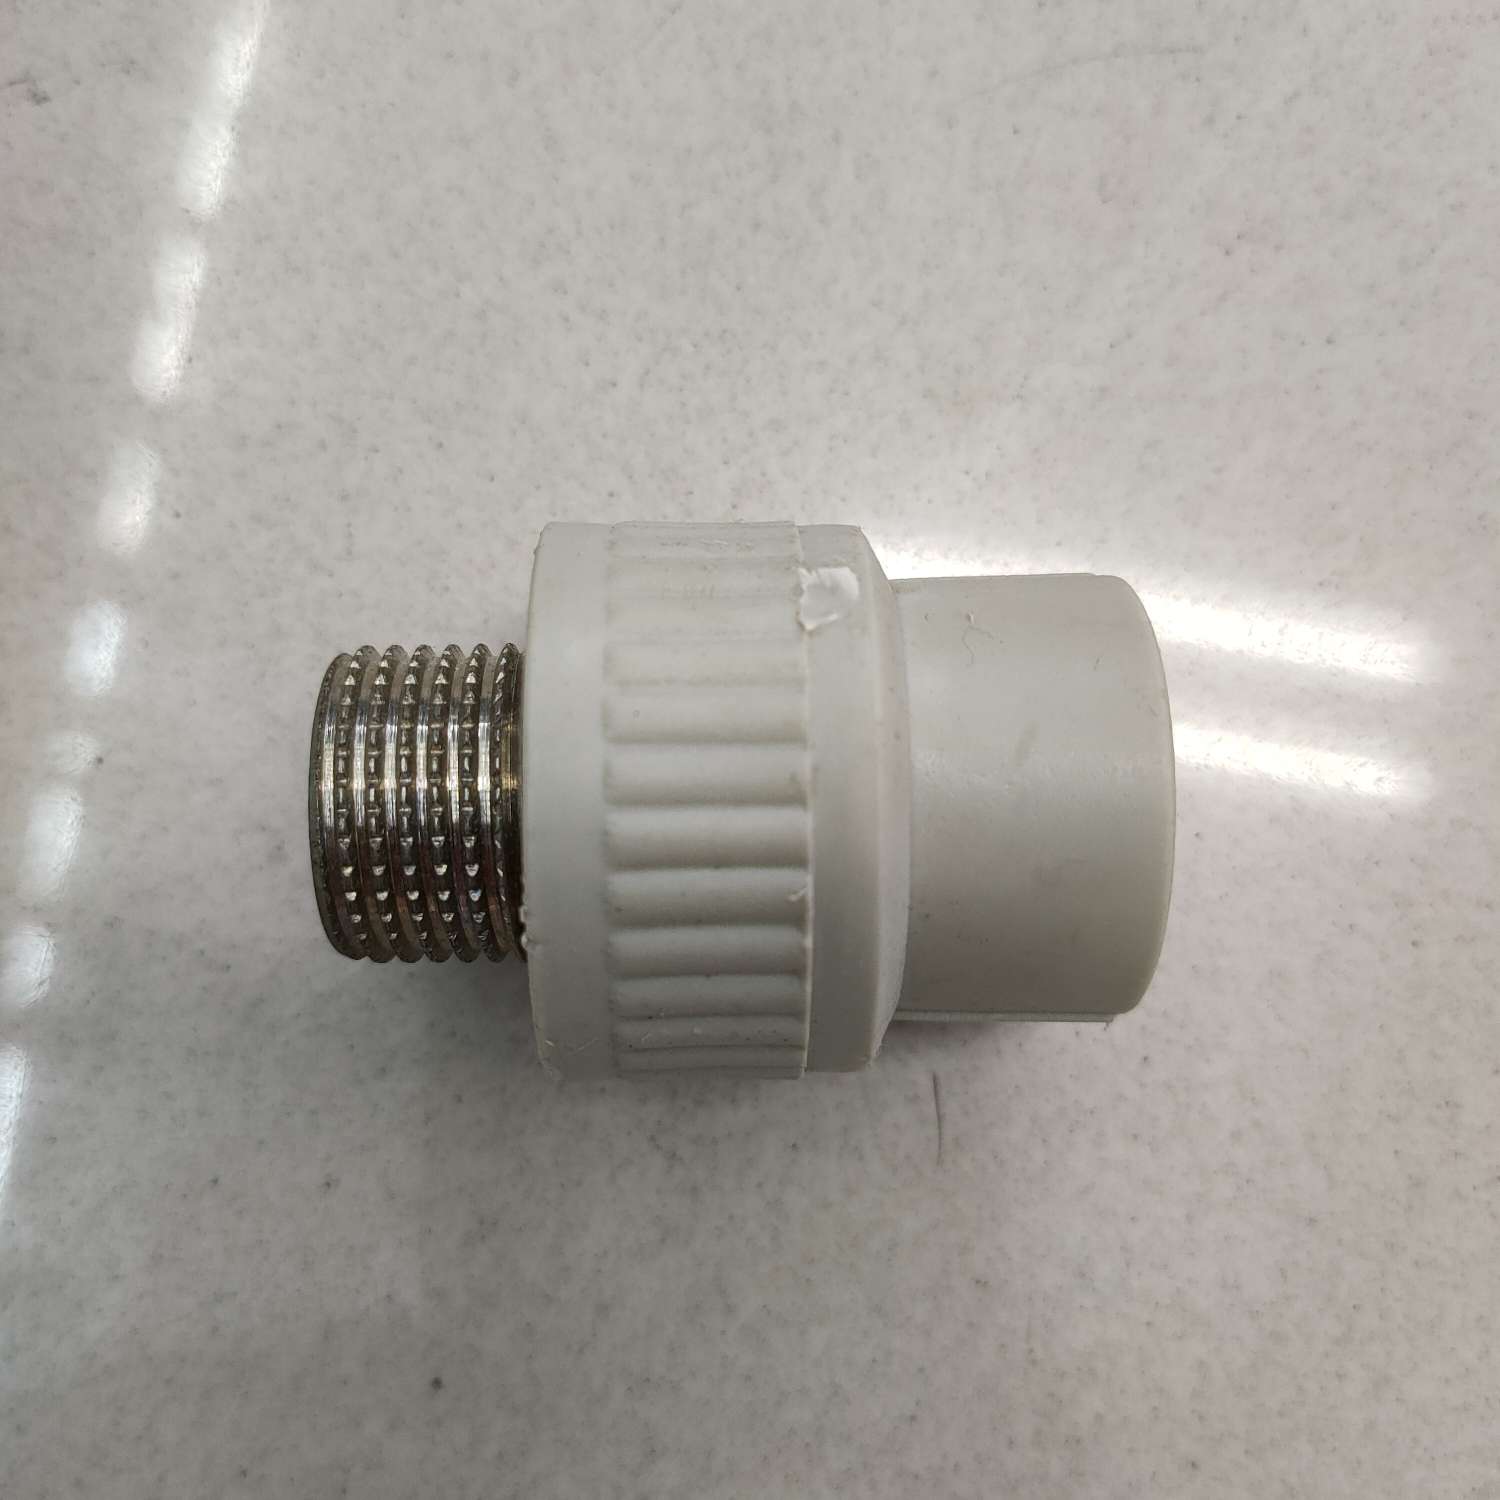 PPR pipe fitting grey color